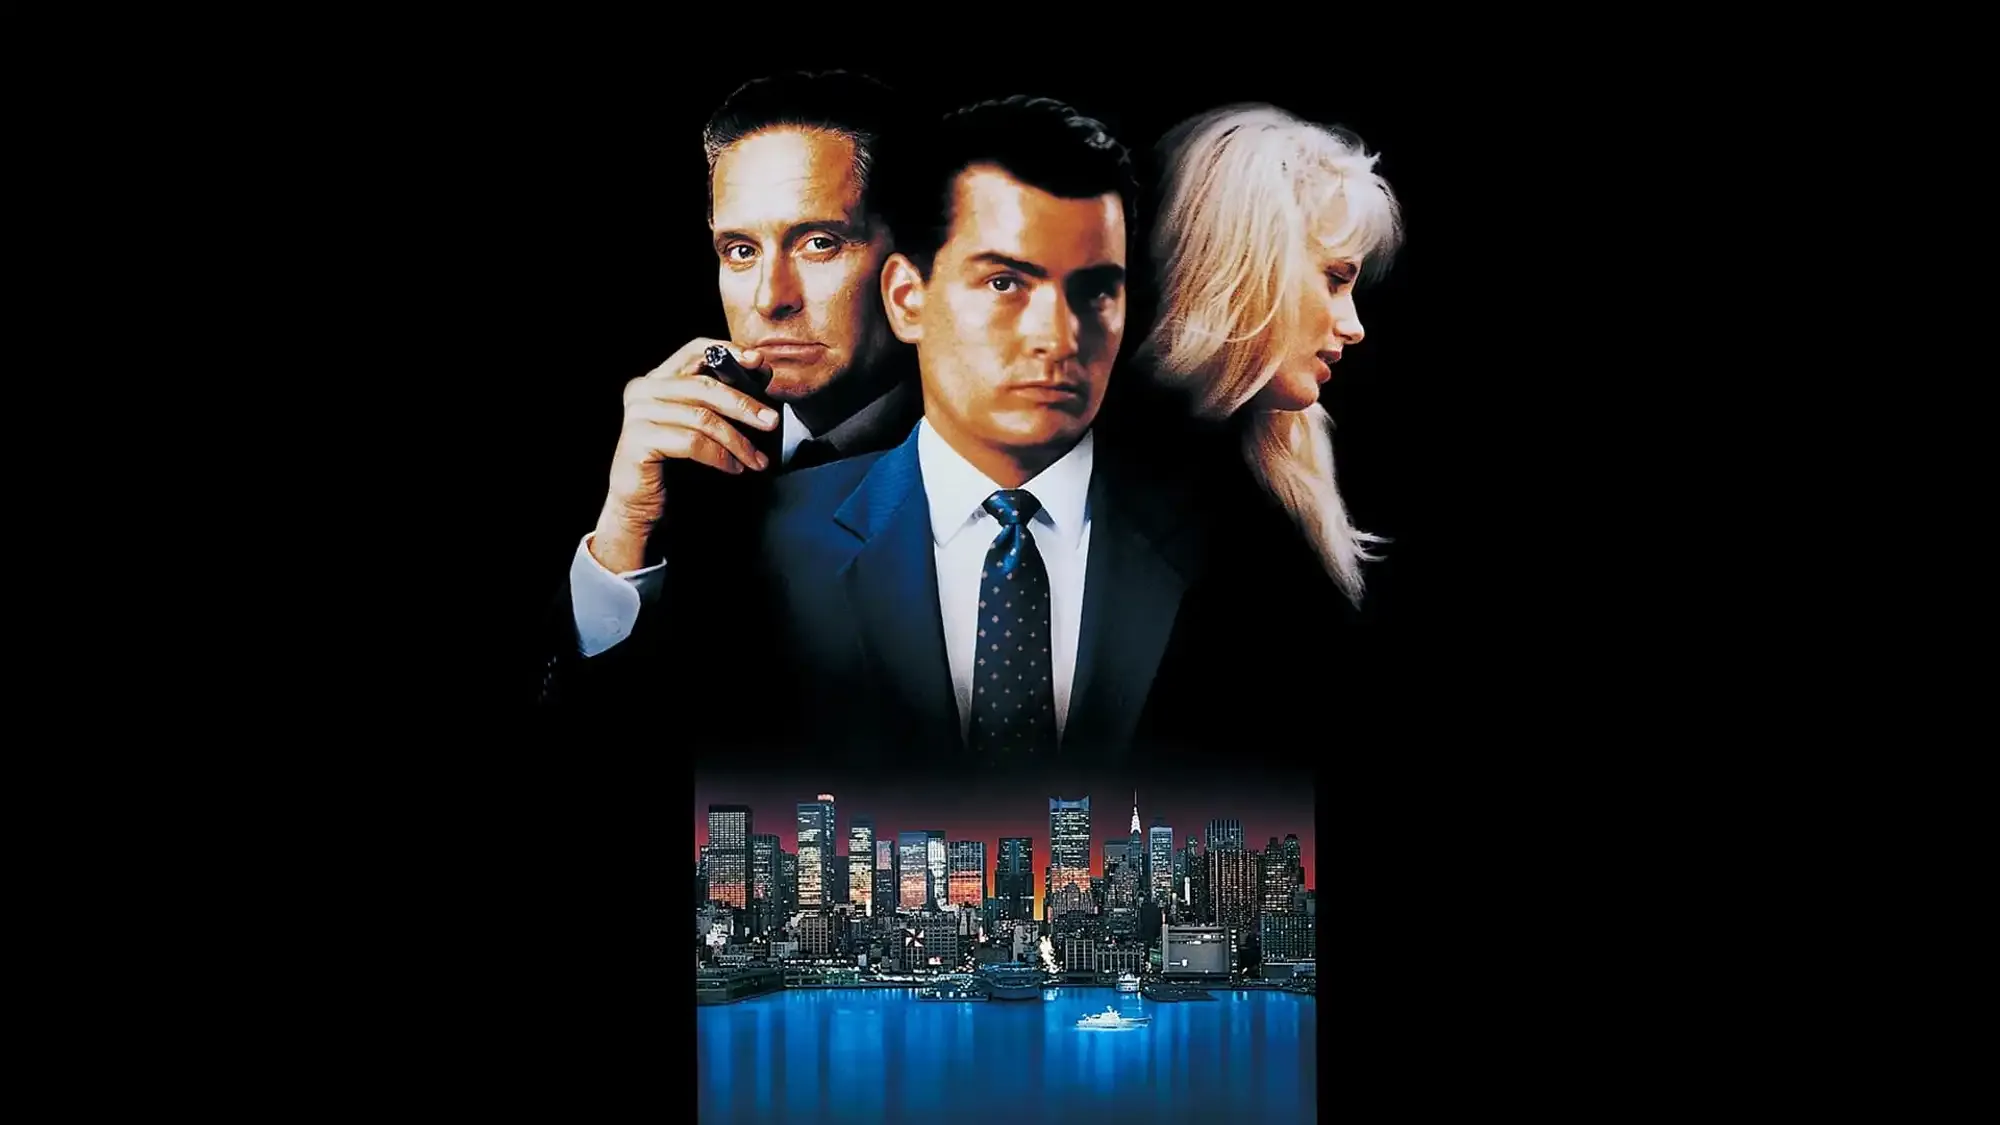 Wall Street movie review